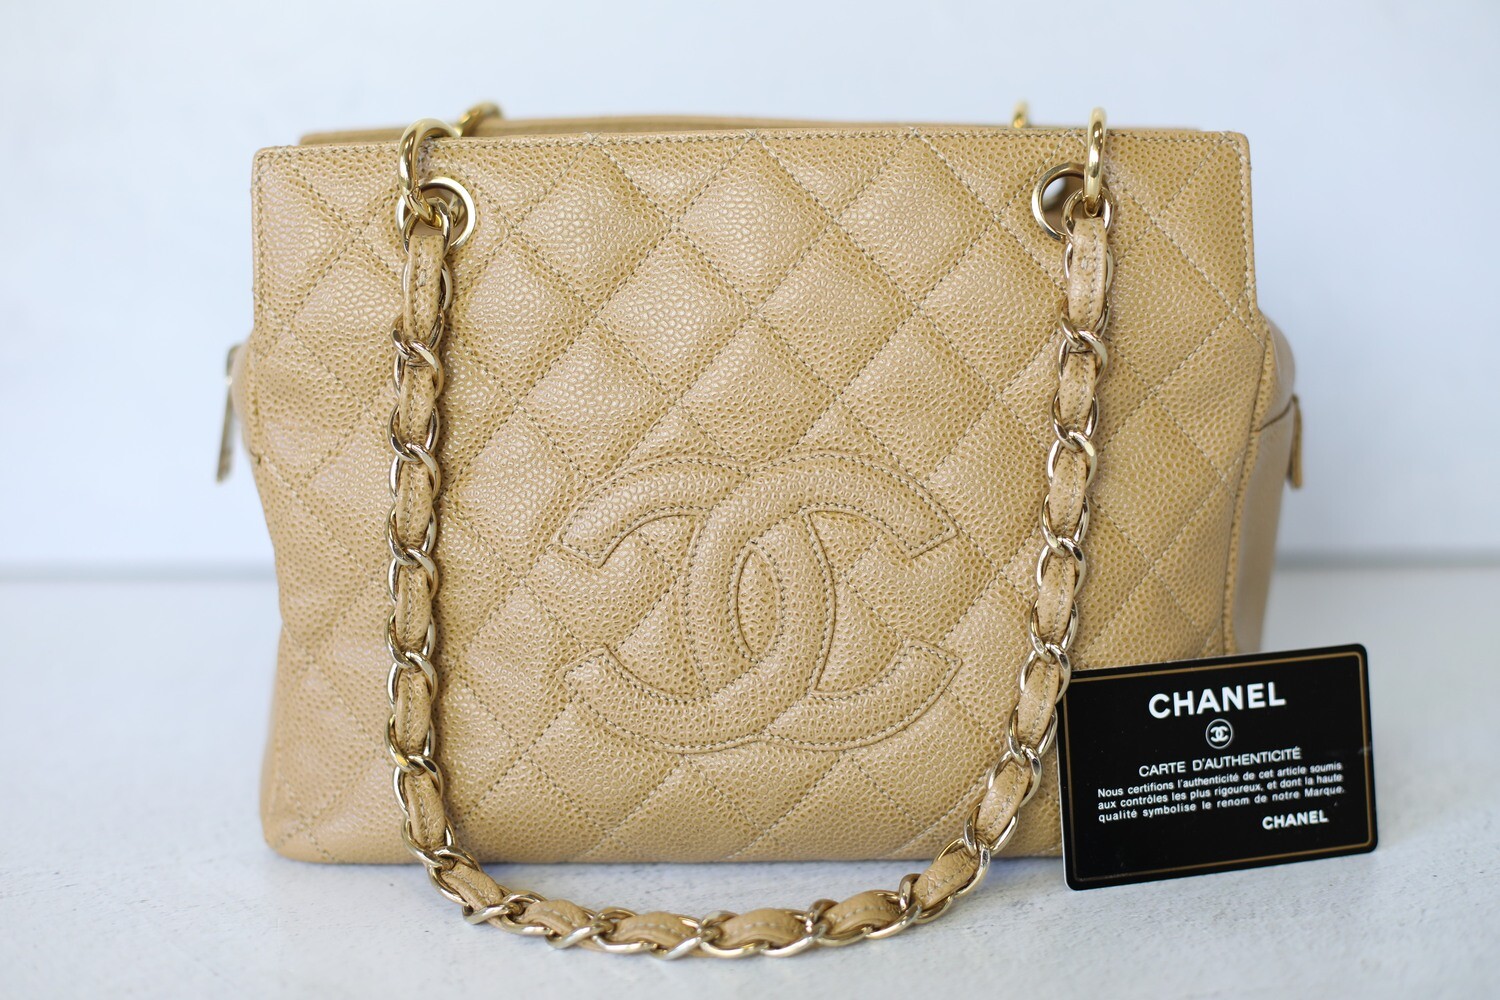 Petite shopping tote leather tote Chanel Beige in Leather - 23621543